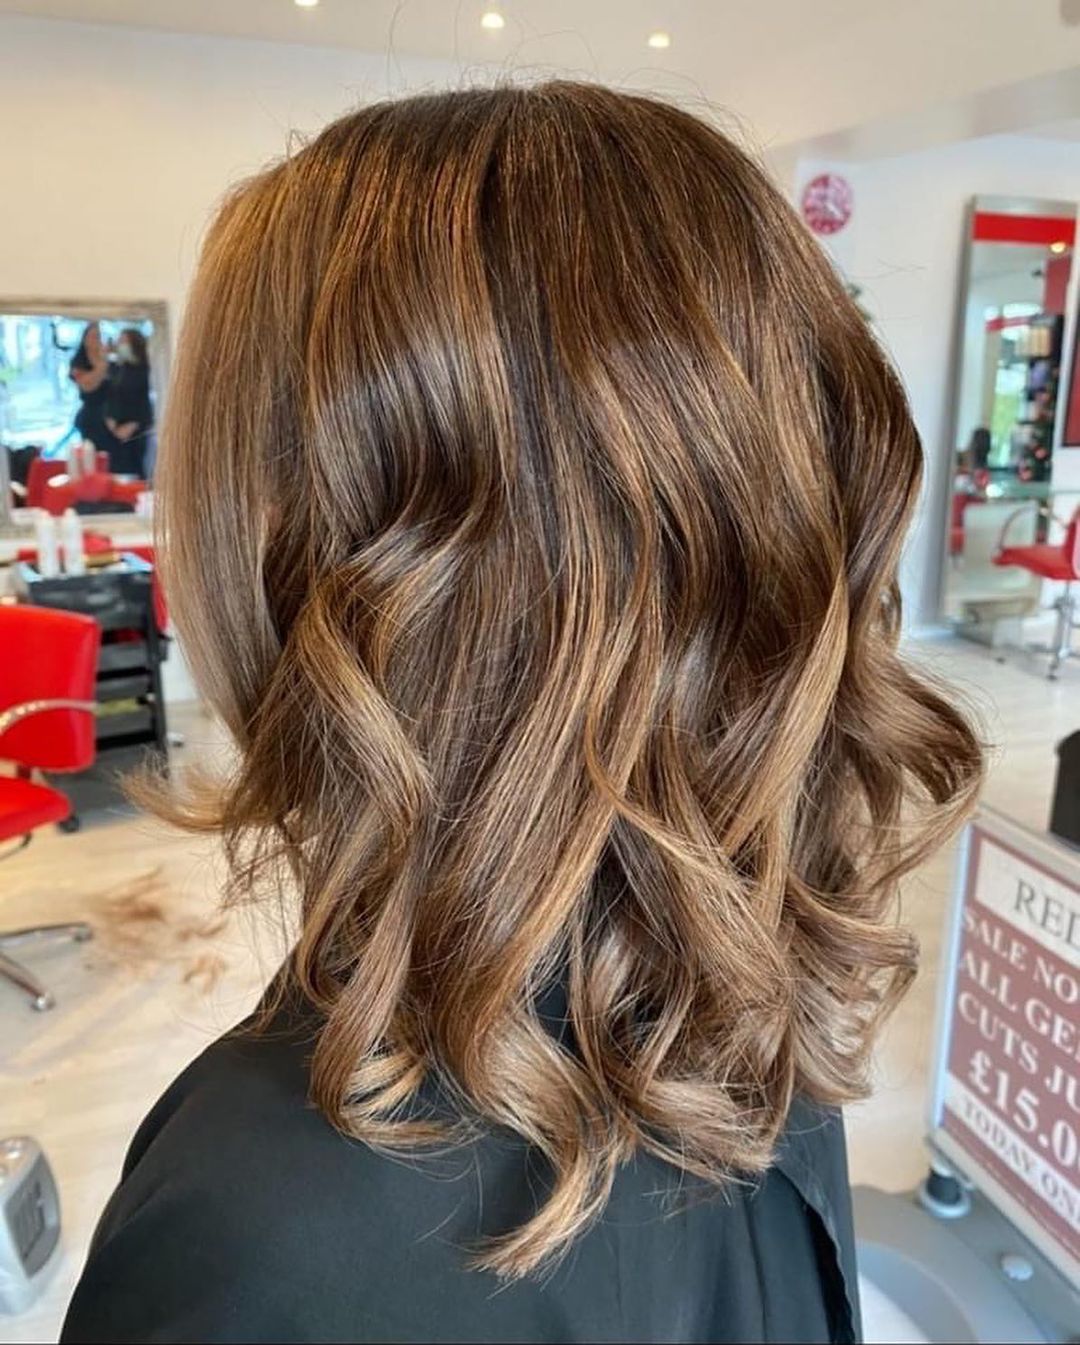 50% OFF HAIR COLOUR IN RYE AT RED HAIR SALONS